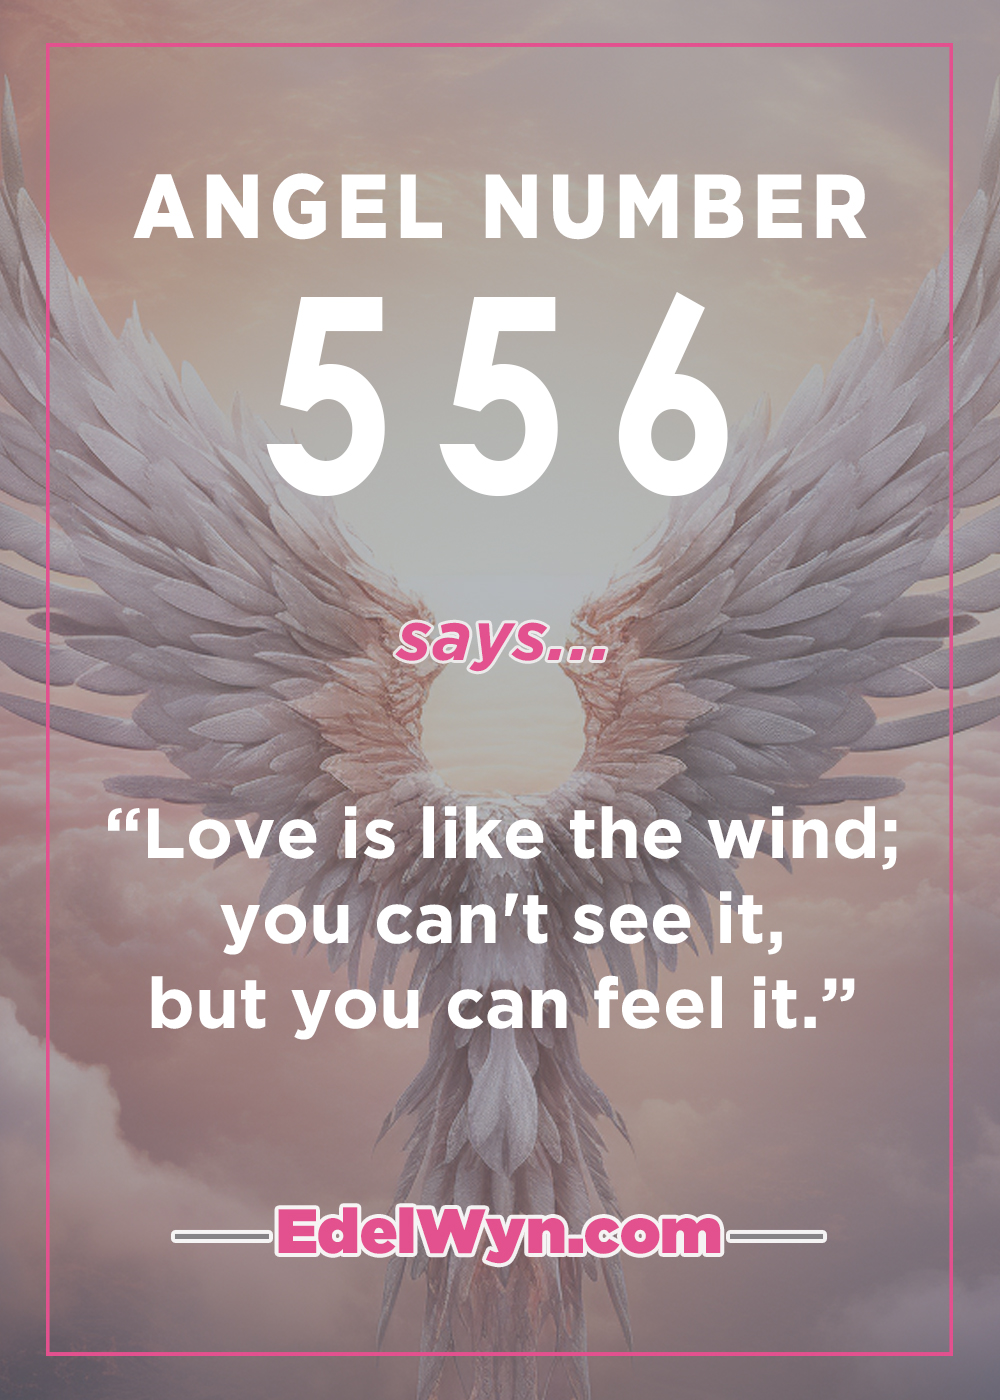 Angels Are Sending You This Message With 556 Angel Number